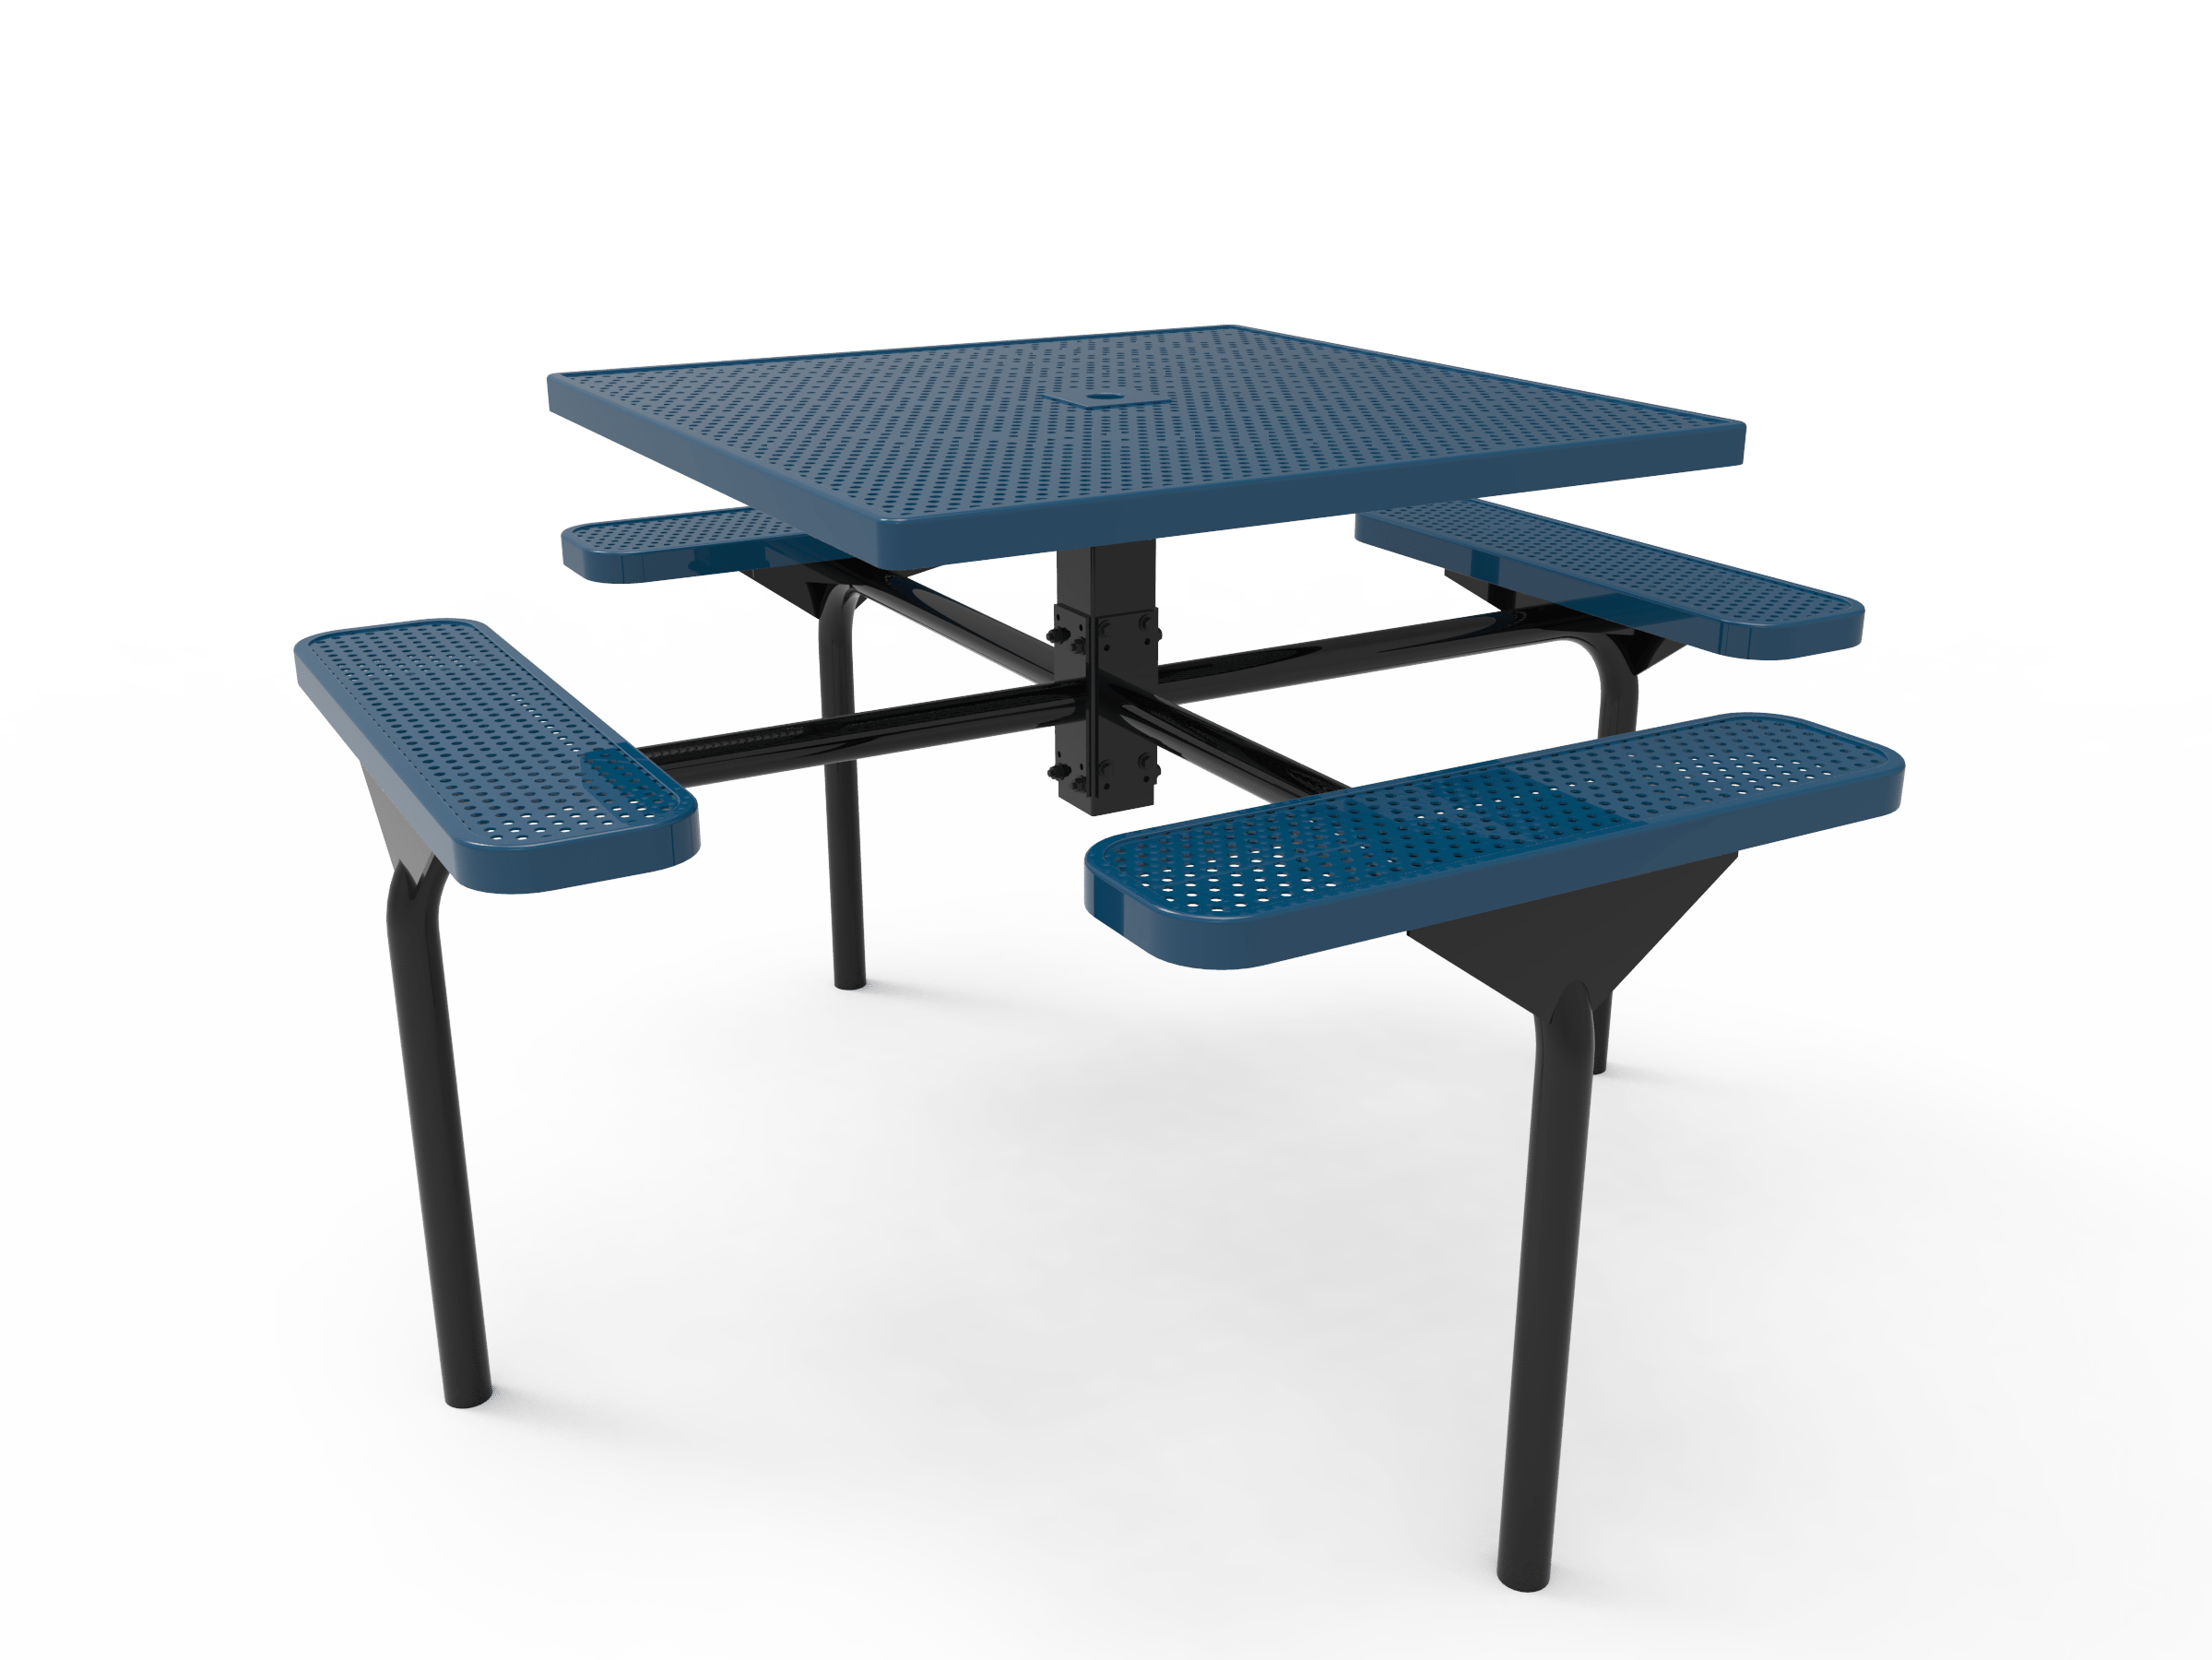 46″ Square Nexus In Ground Table With 4 Seats-Punched
TSQ46-D-47-000
Industry Standard Finish
$1469.00
TSQ46-B-47-000
Advantage Premium Finish
$1829.00
